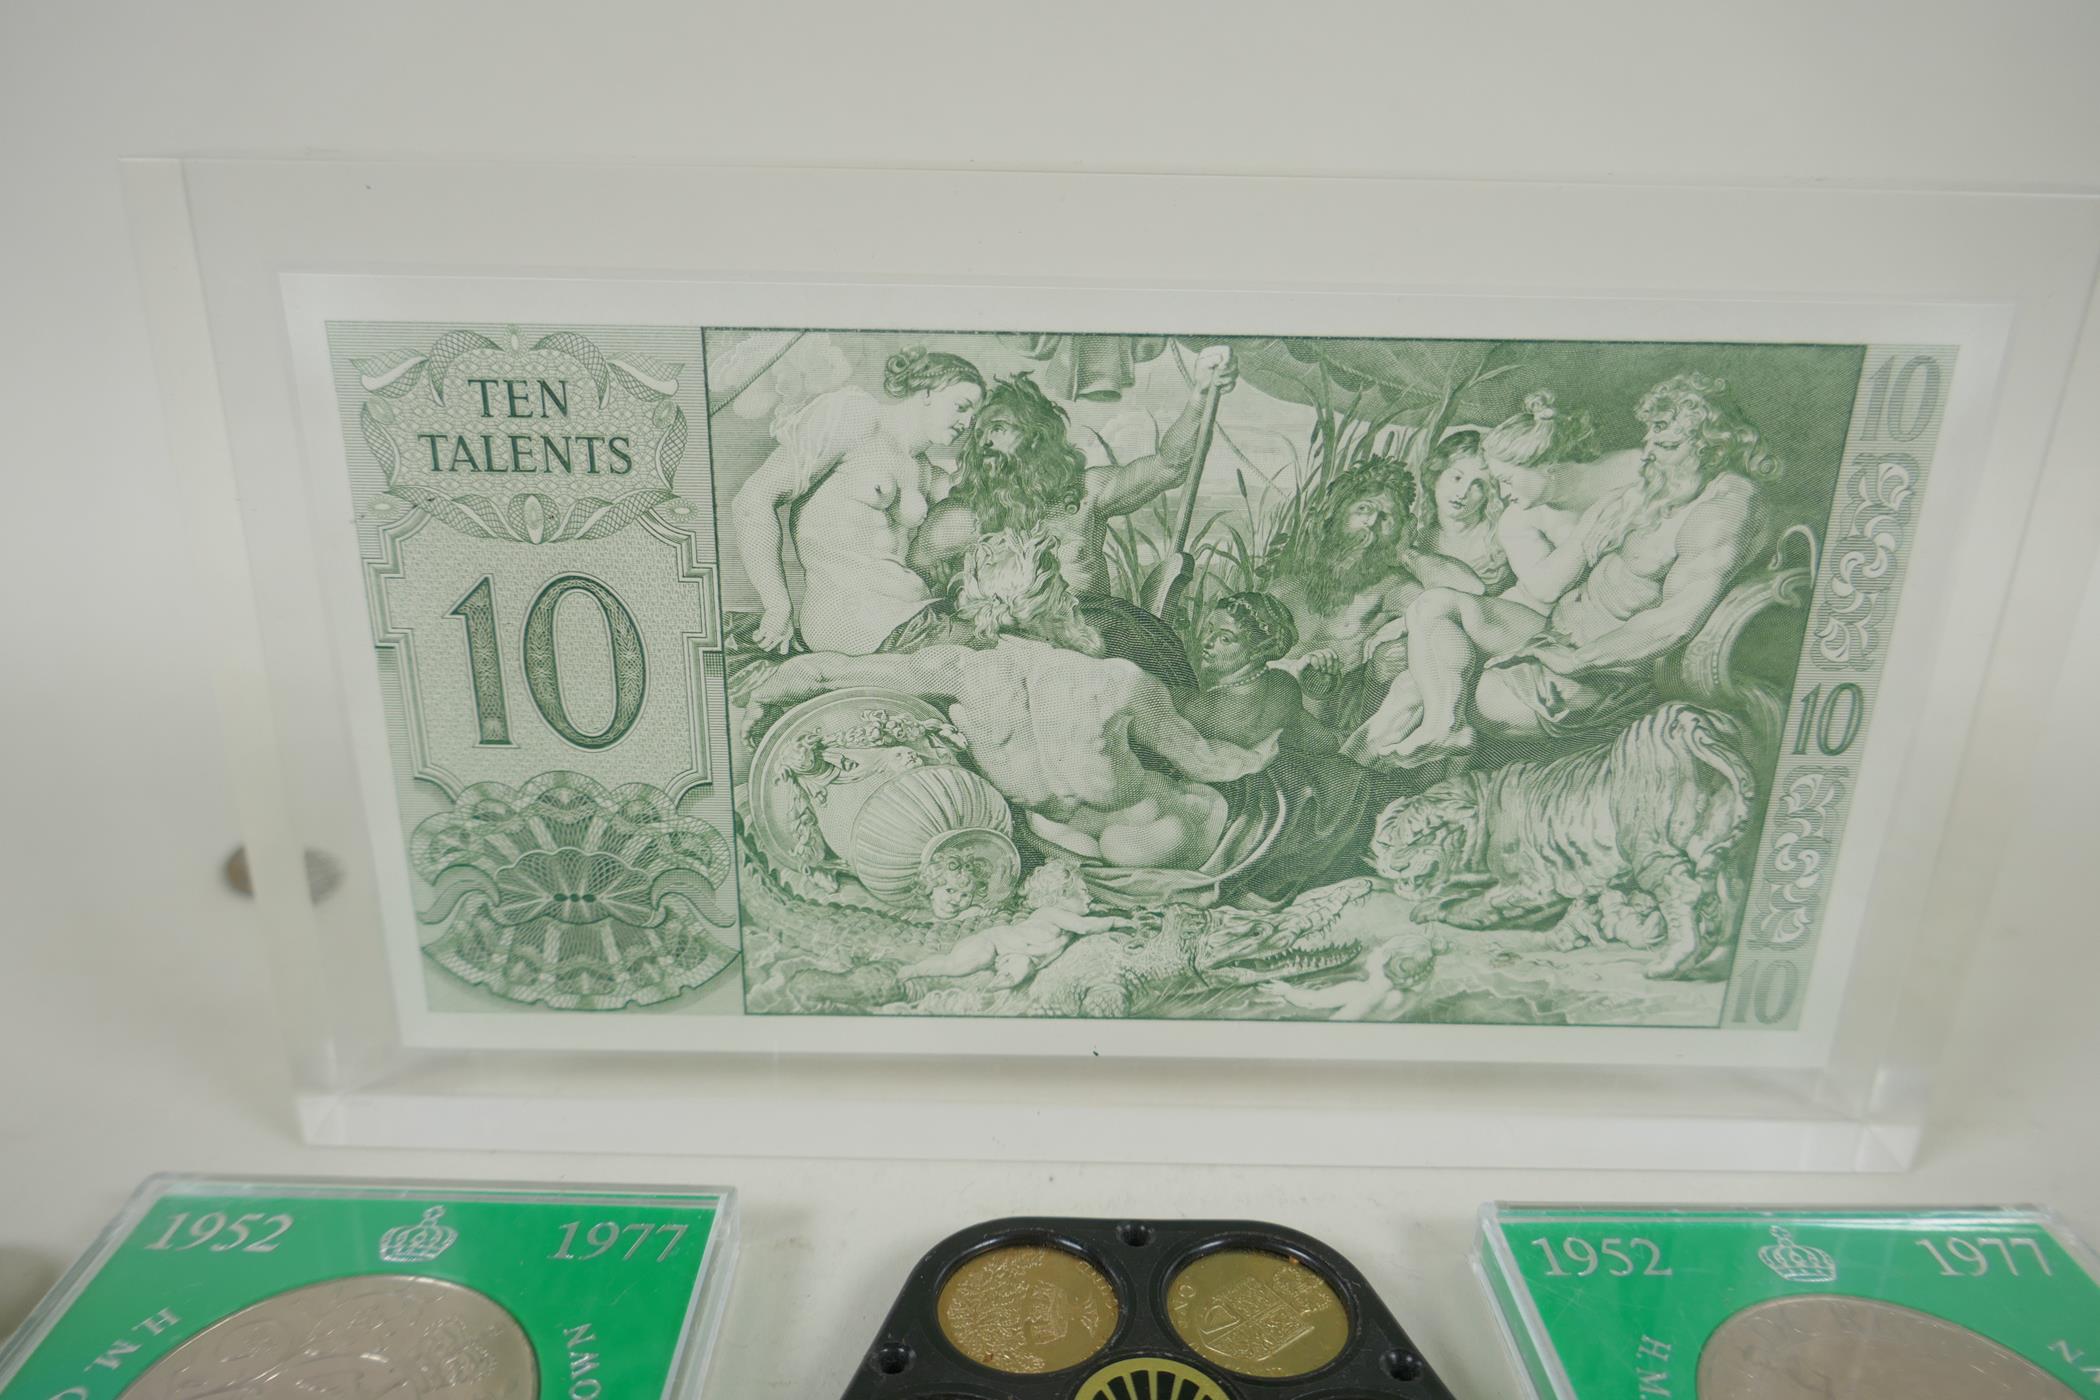 A quantity of assorted coinage, mostly British, and a ten Talents framed note - Image 2 of 6